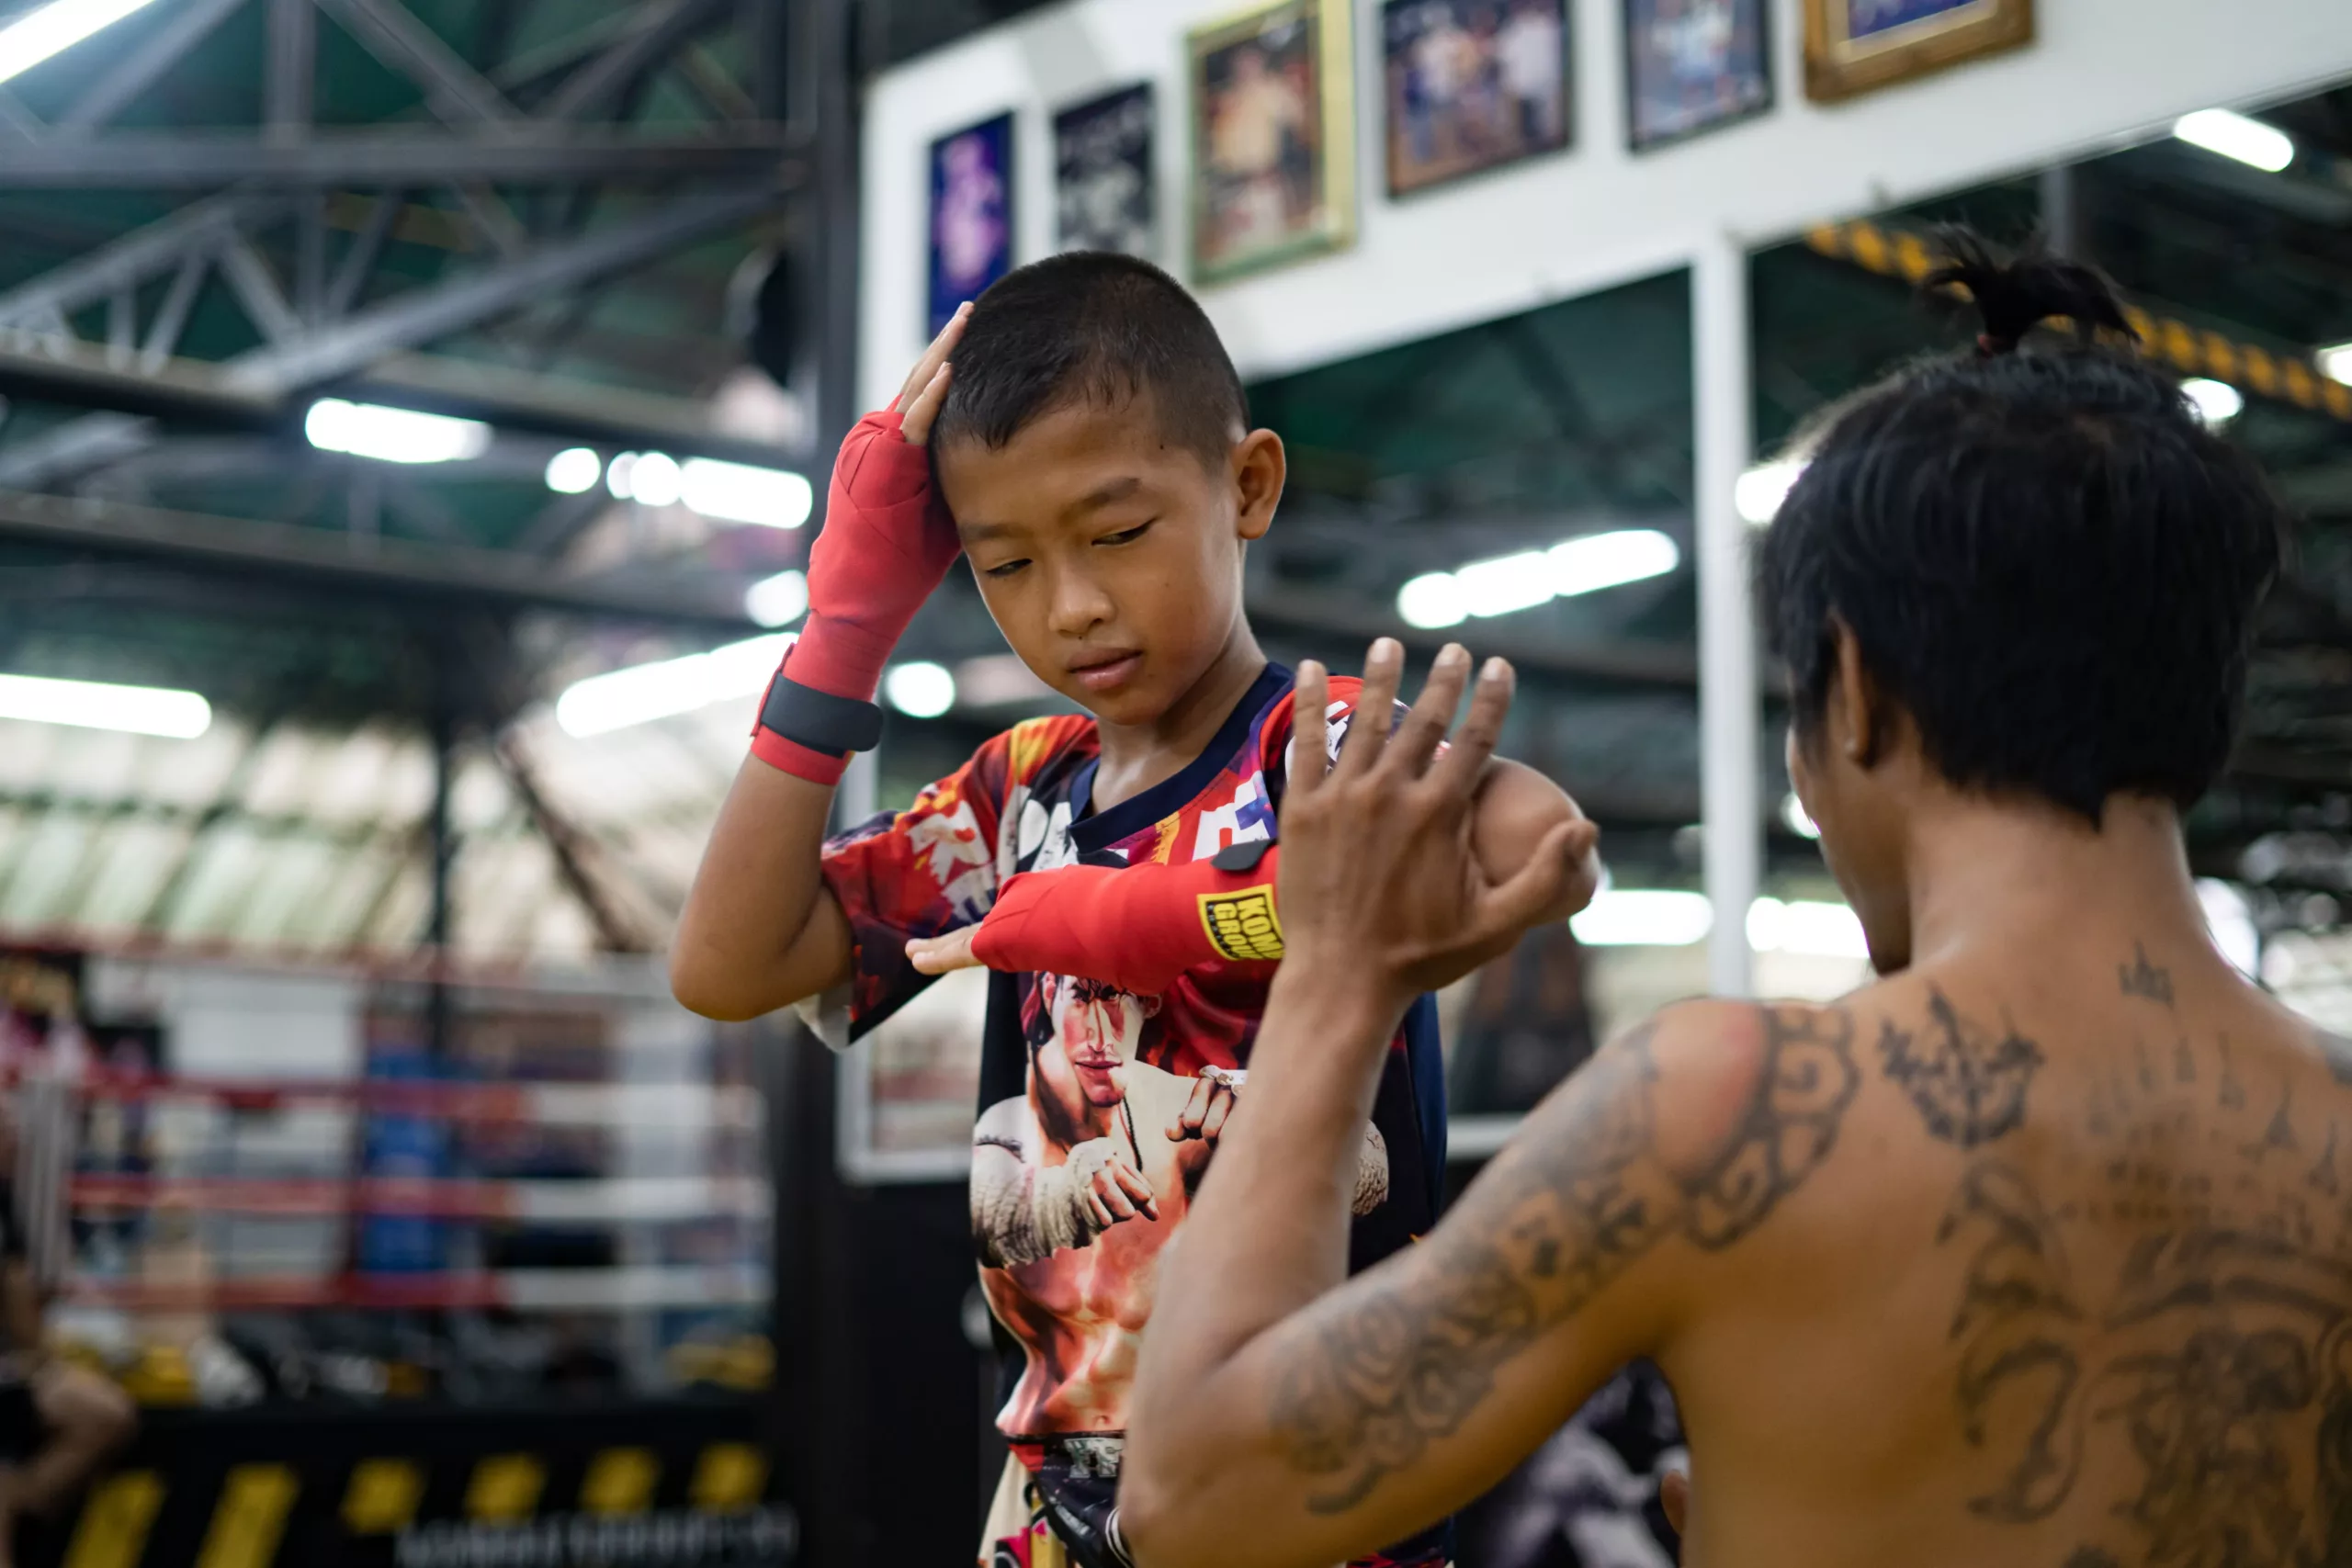 A young boy in Muay Thai attire attentively listens to instructions, wearing hand wraps and a focused expression, as his coach demonstrates a technique in a gym filled with cultural décor.